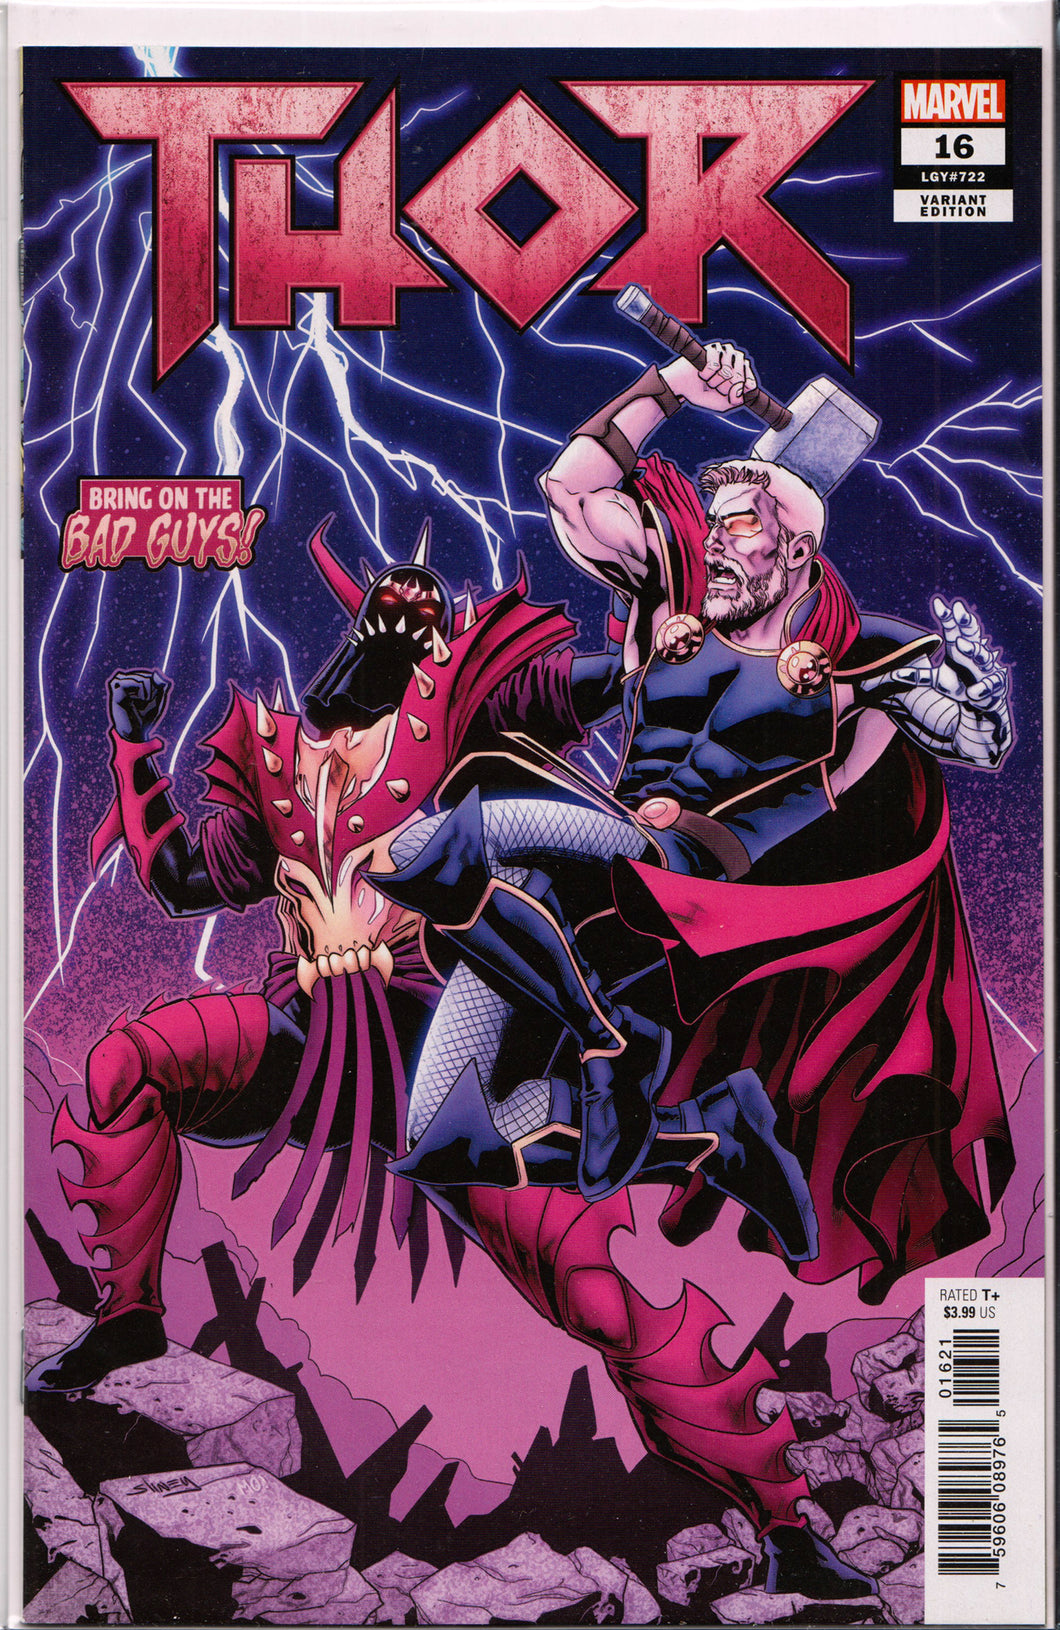 THOR #16 (BRING ON THE BAD GUYS VARIANT) COMIC BOOK ~ Marvel Comics